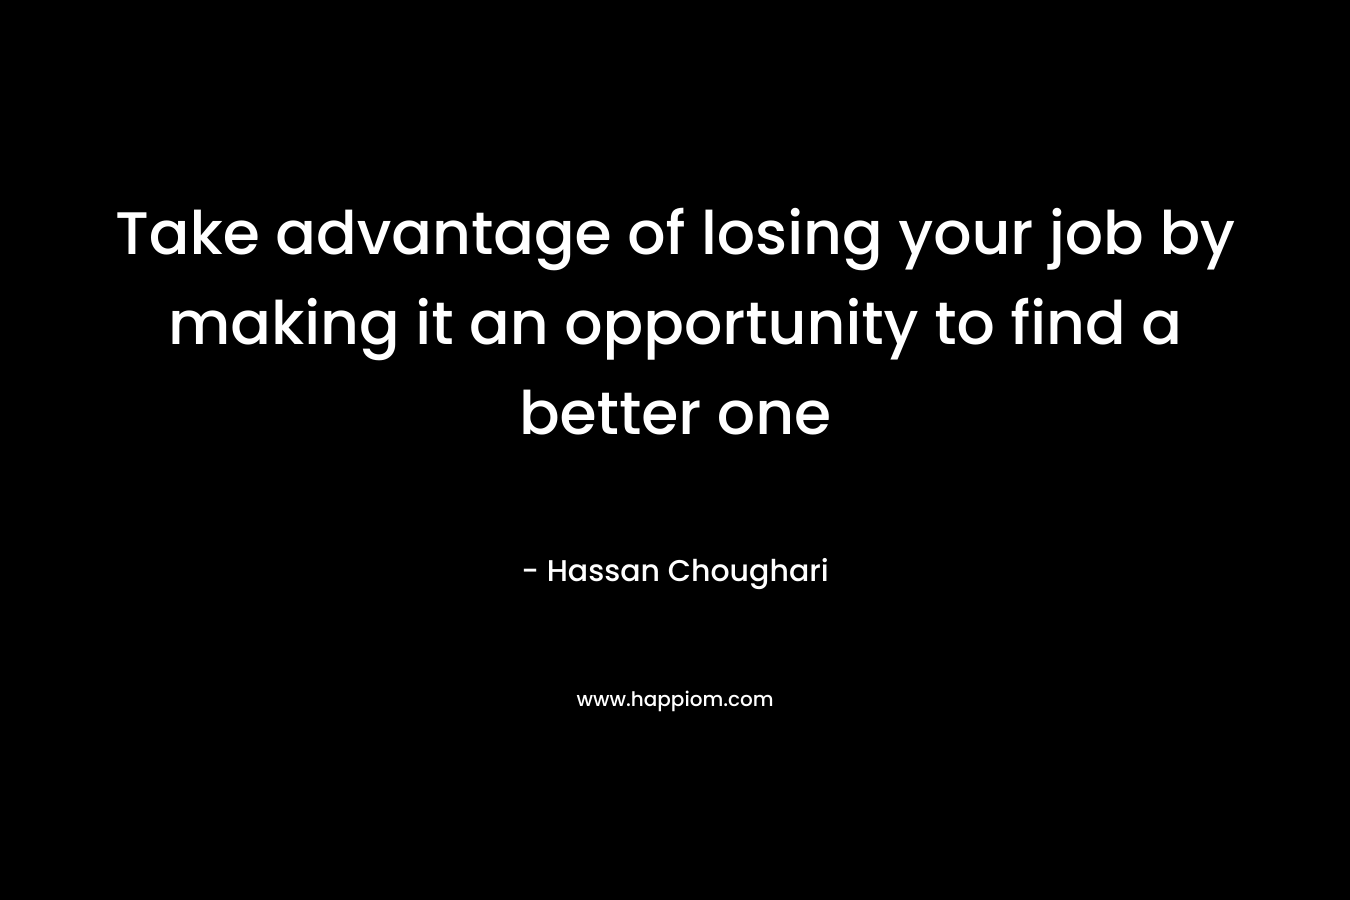 Take advantage of losing your job by making it an opportunity to find a better one